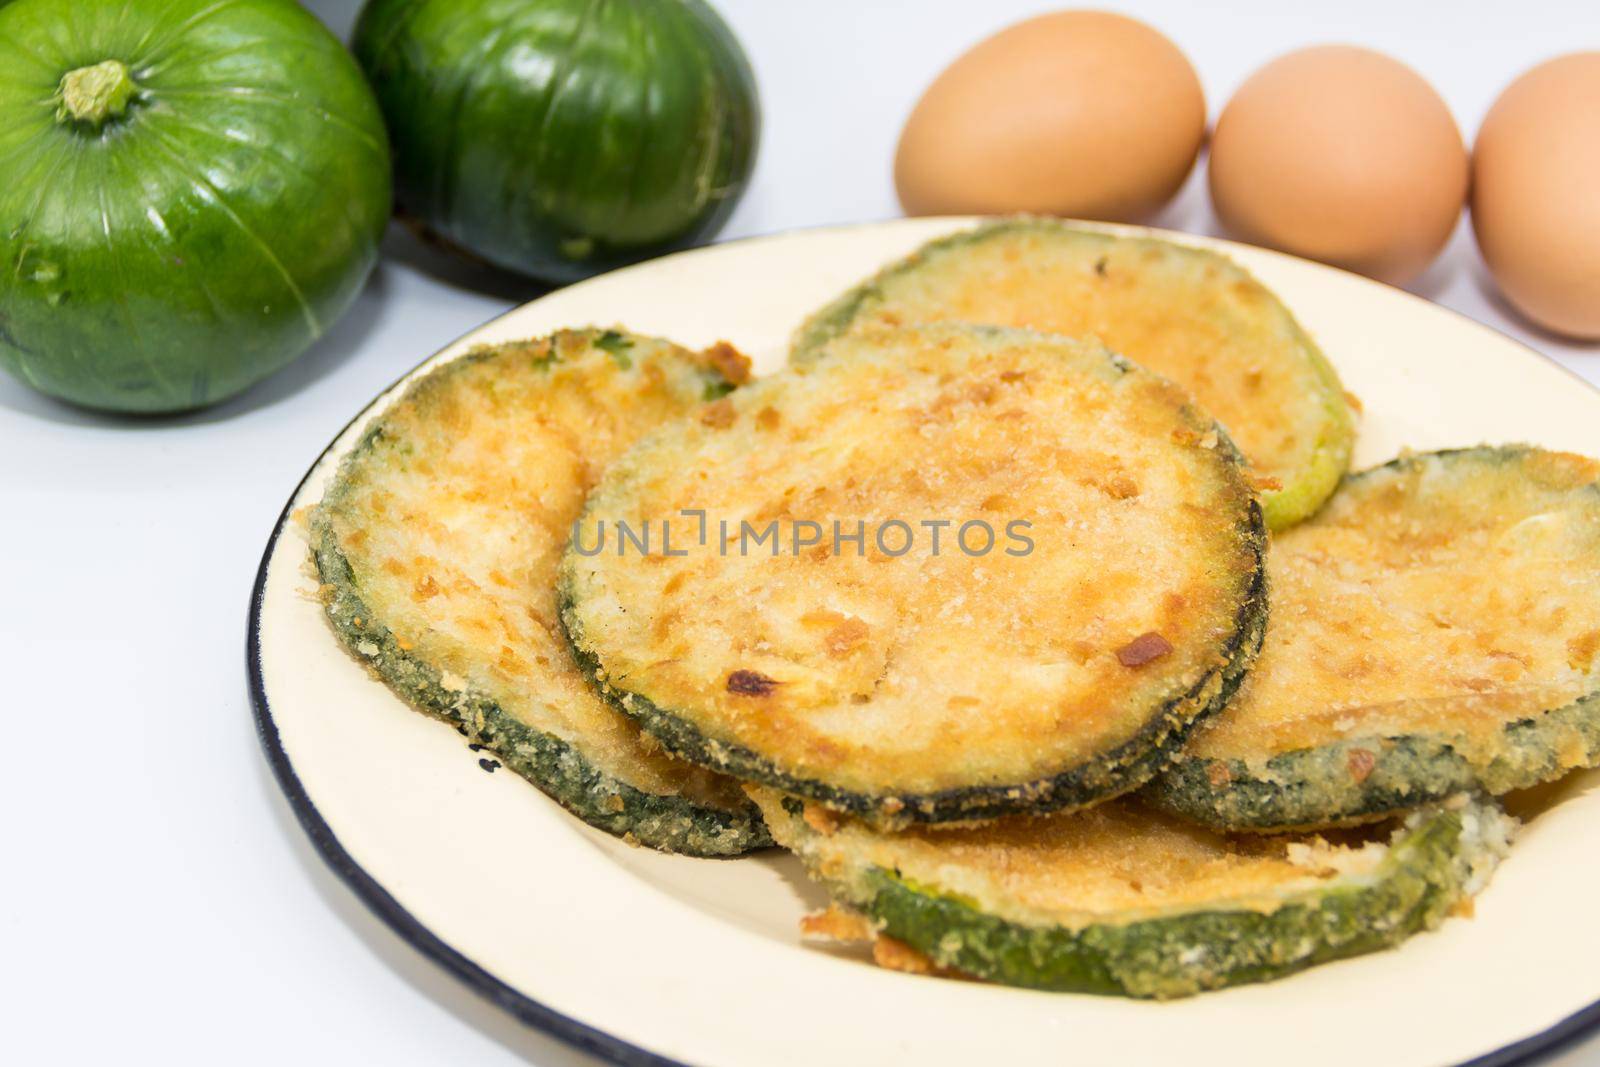 Trunk zucchini in baked or fried milanesas, Argentine cuisine by GabrielaBertolini